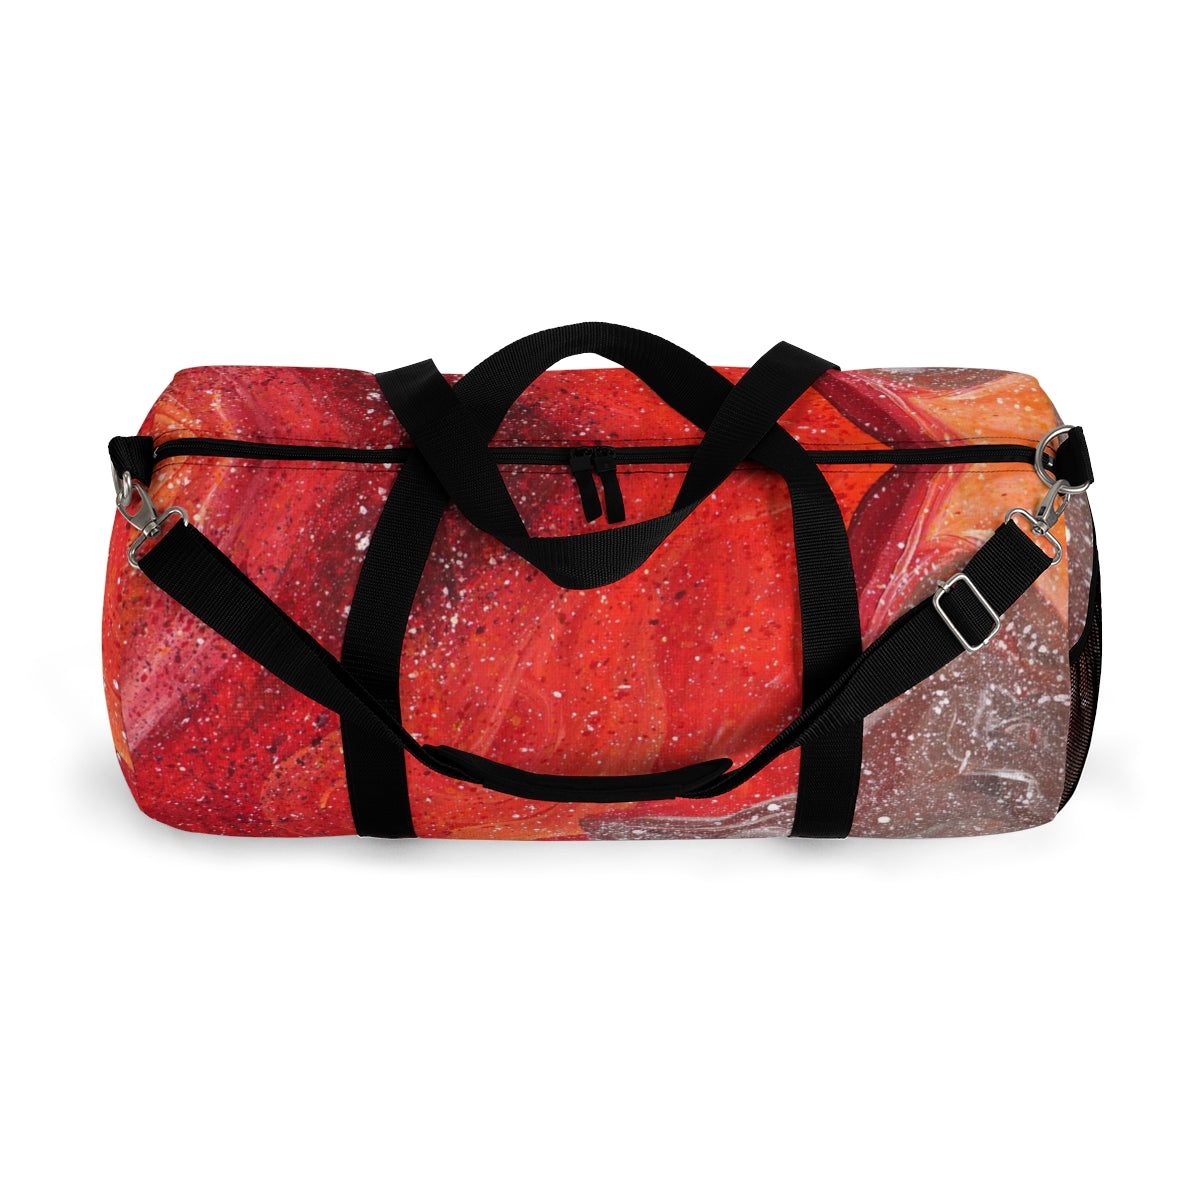 Waves of Creation Duffel Bag (multi size)